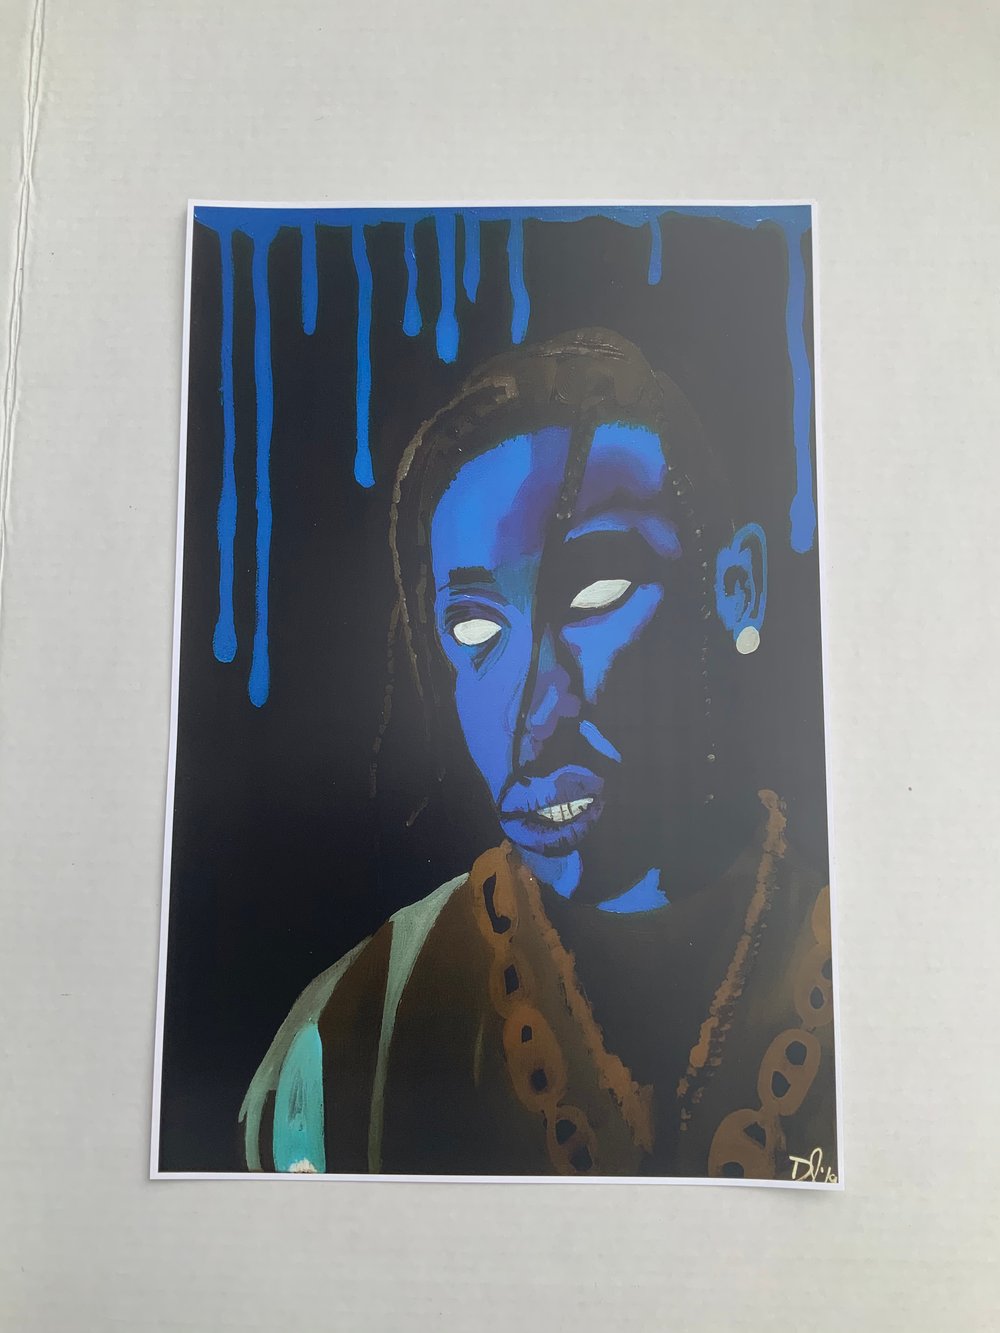 Image of Sicko Mode Glossy Print